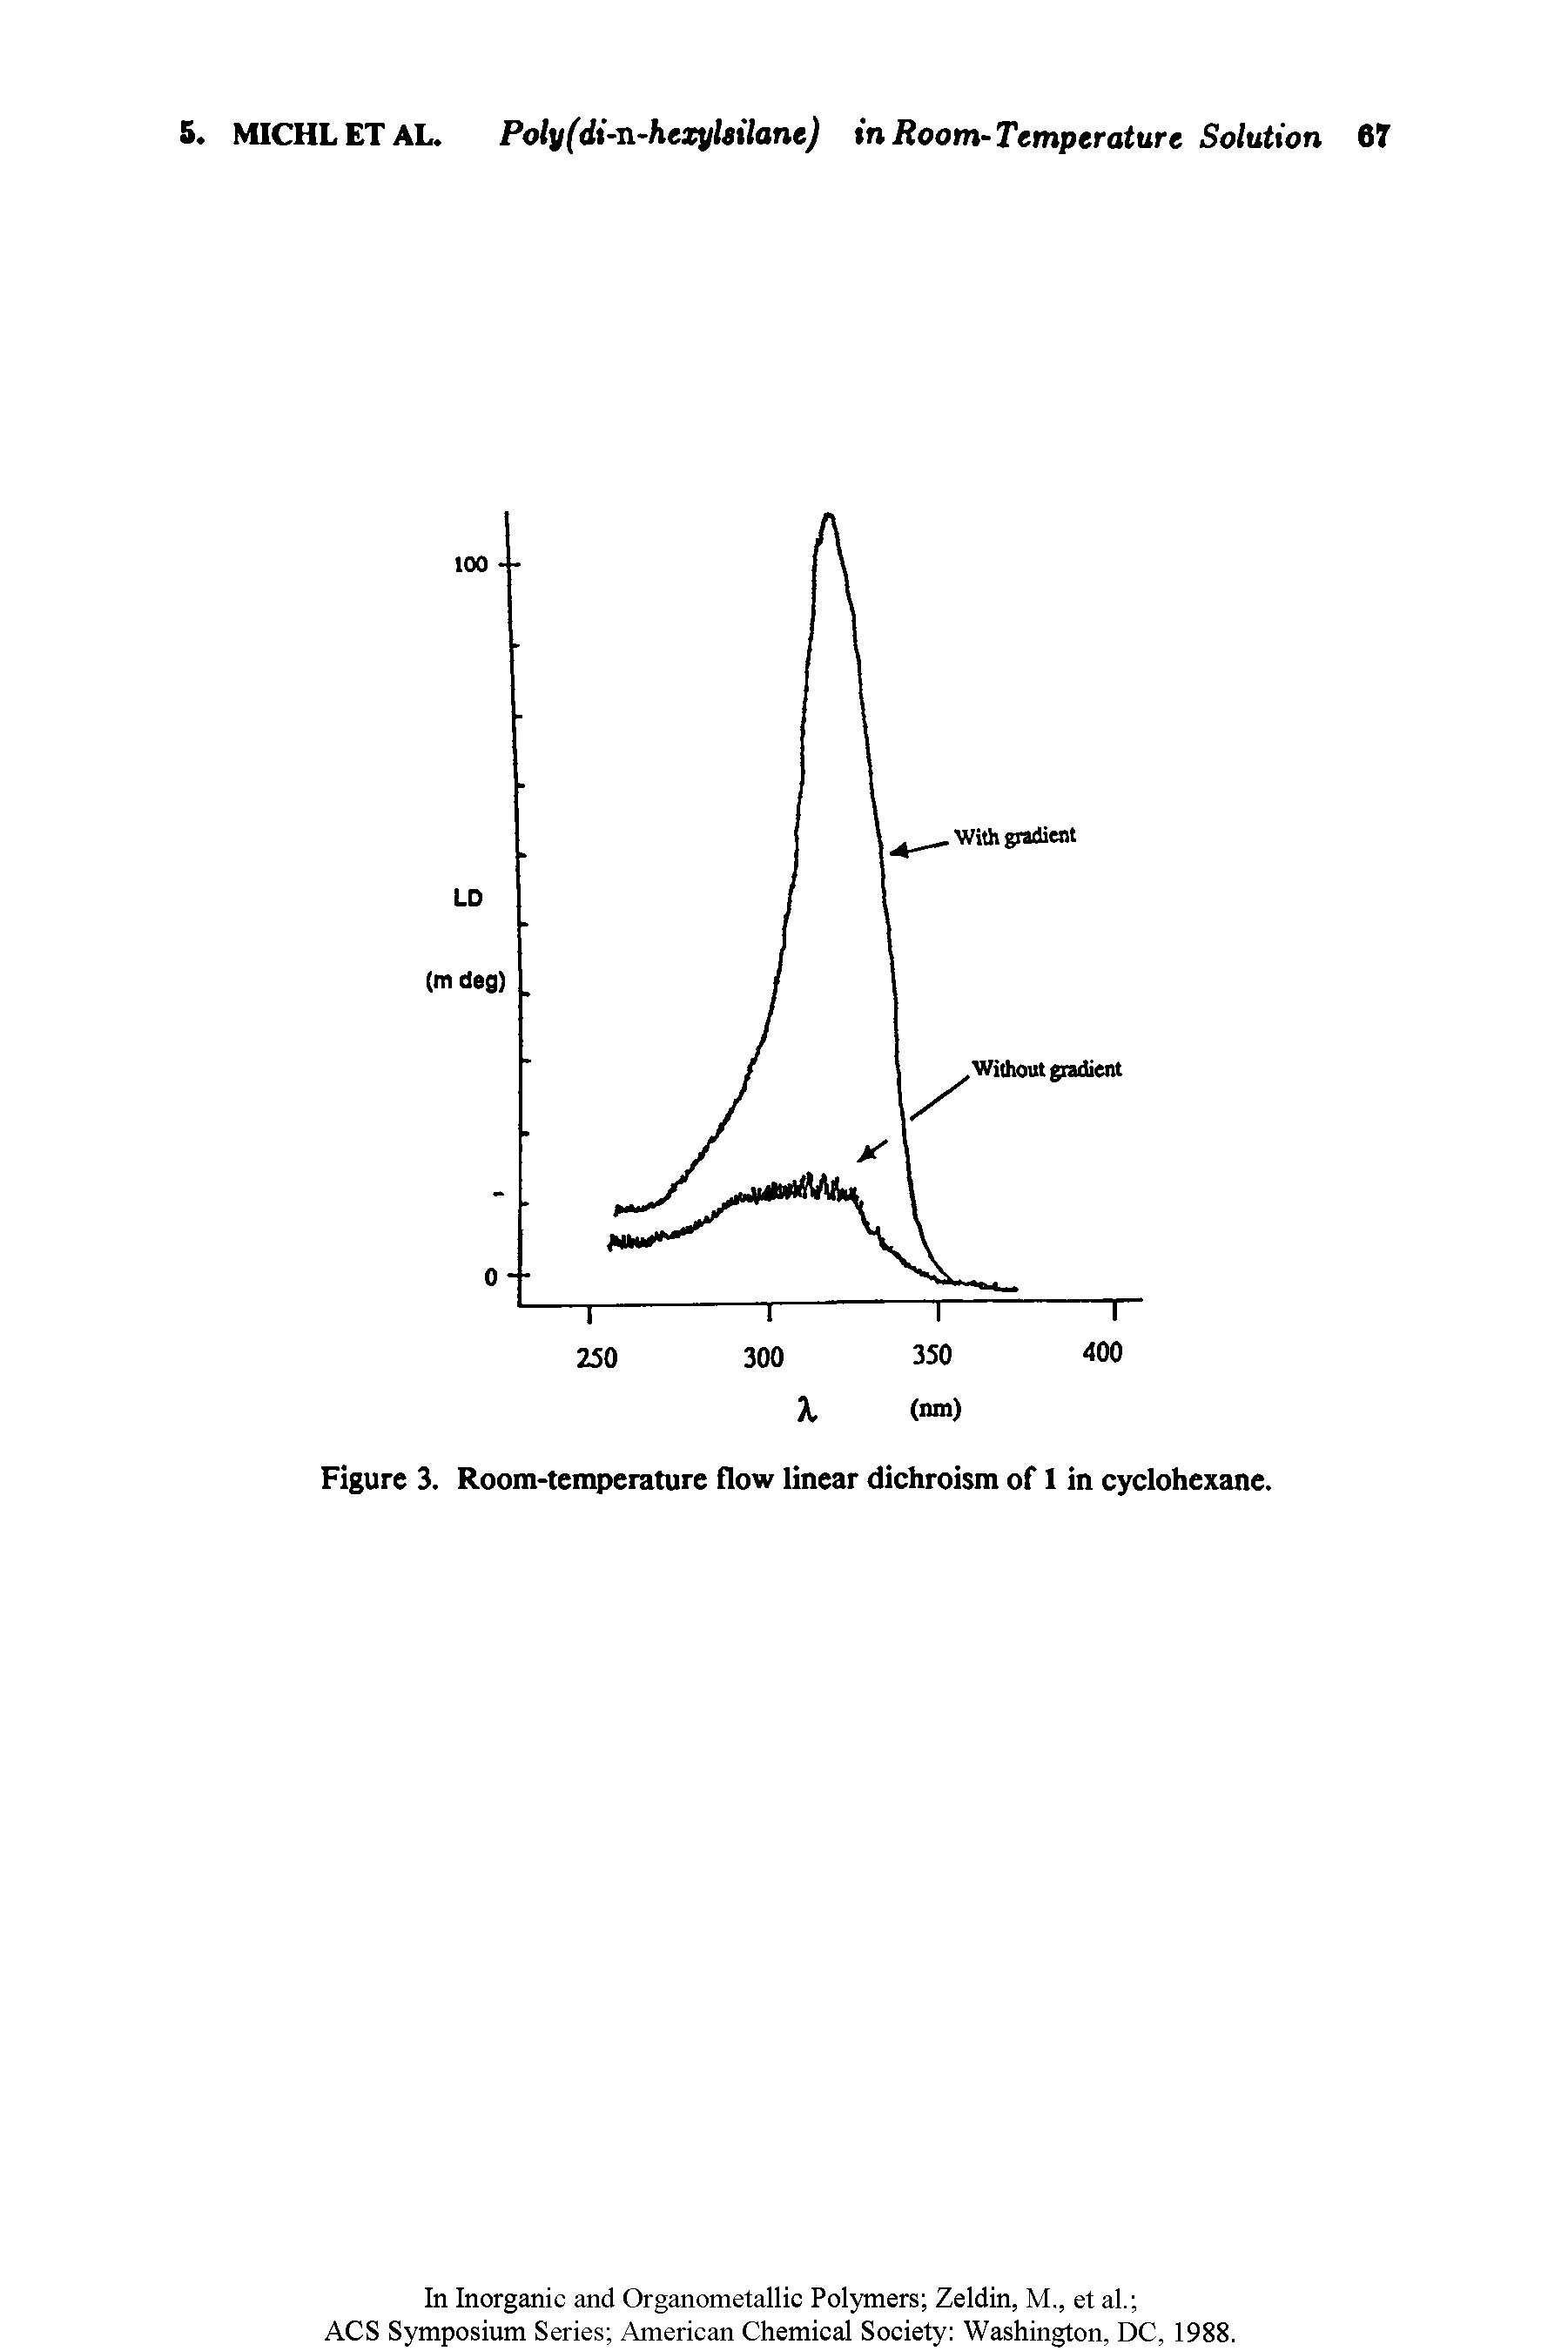 Figure 3. Room-temperature flow linear dichroism of 1 in cyclohexane.